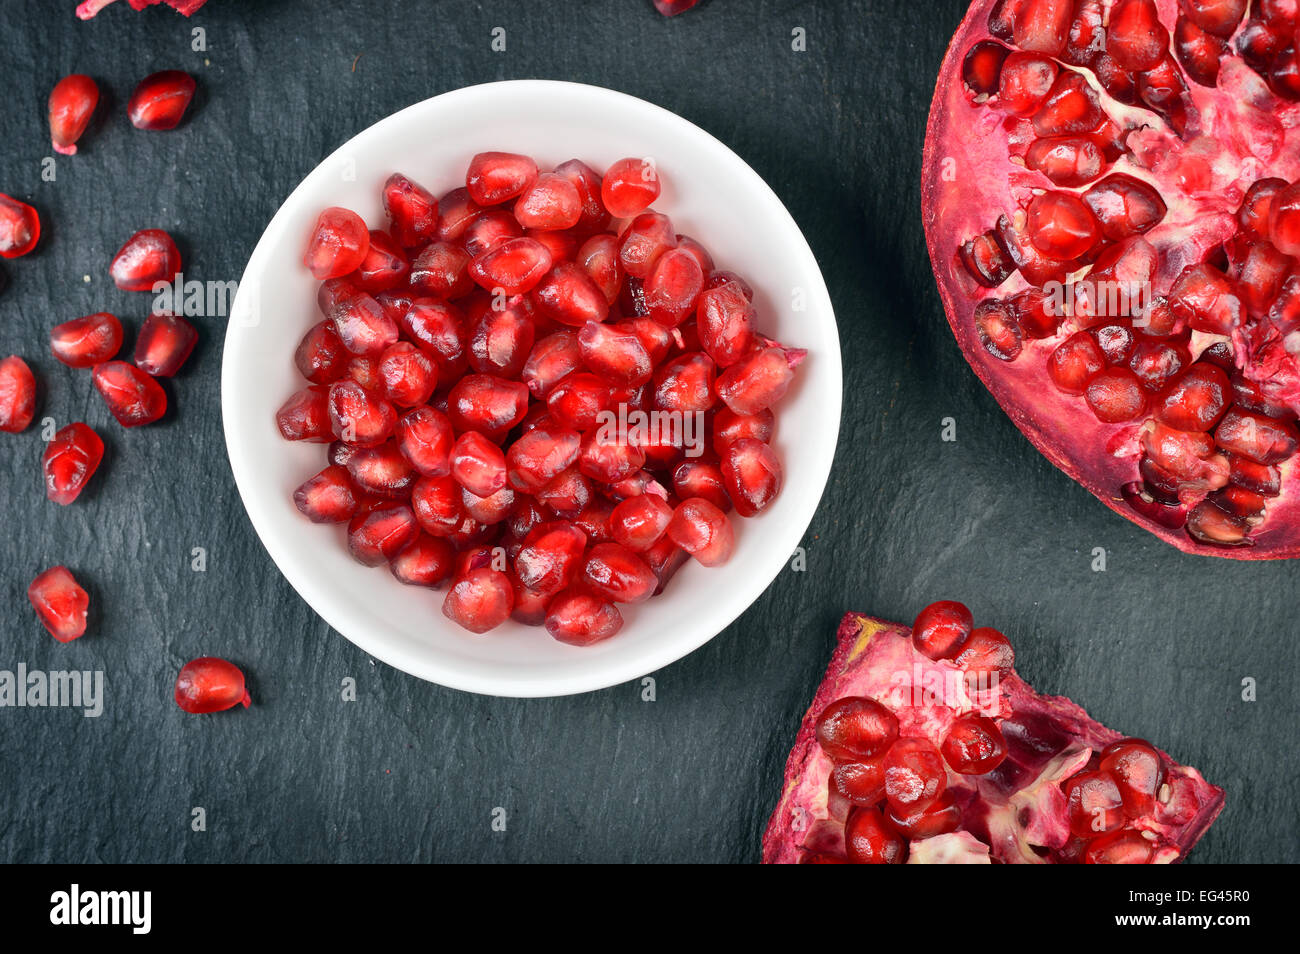 Red pomegranate seeds in a white bowl on table. Open fresh ripe pomegranate. Stock Photo